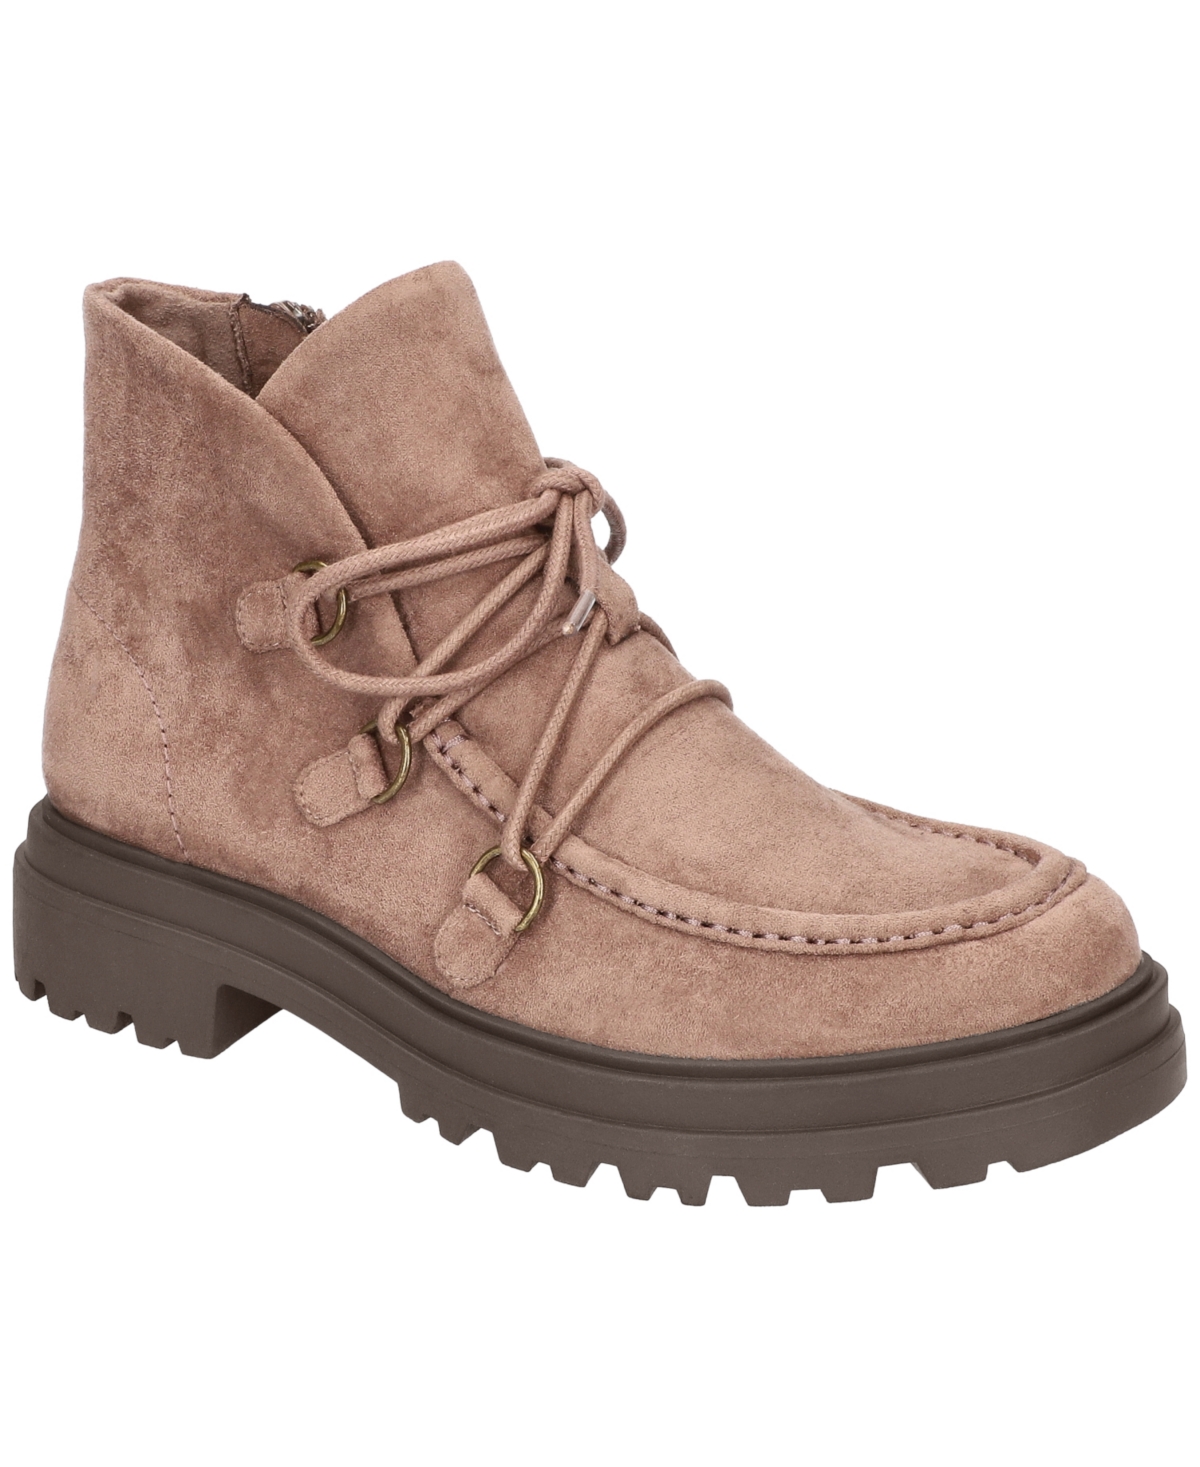 Women's Xandy Lace-Up Side Zip Ankle Booties - Taupe Suede